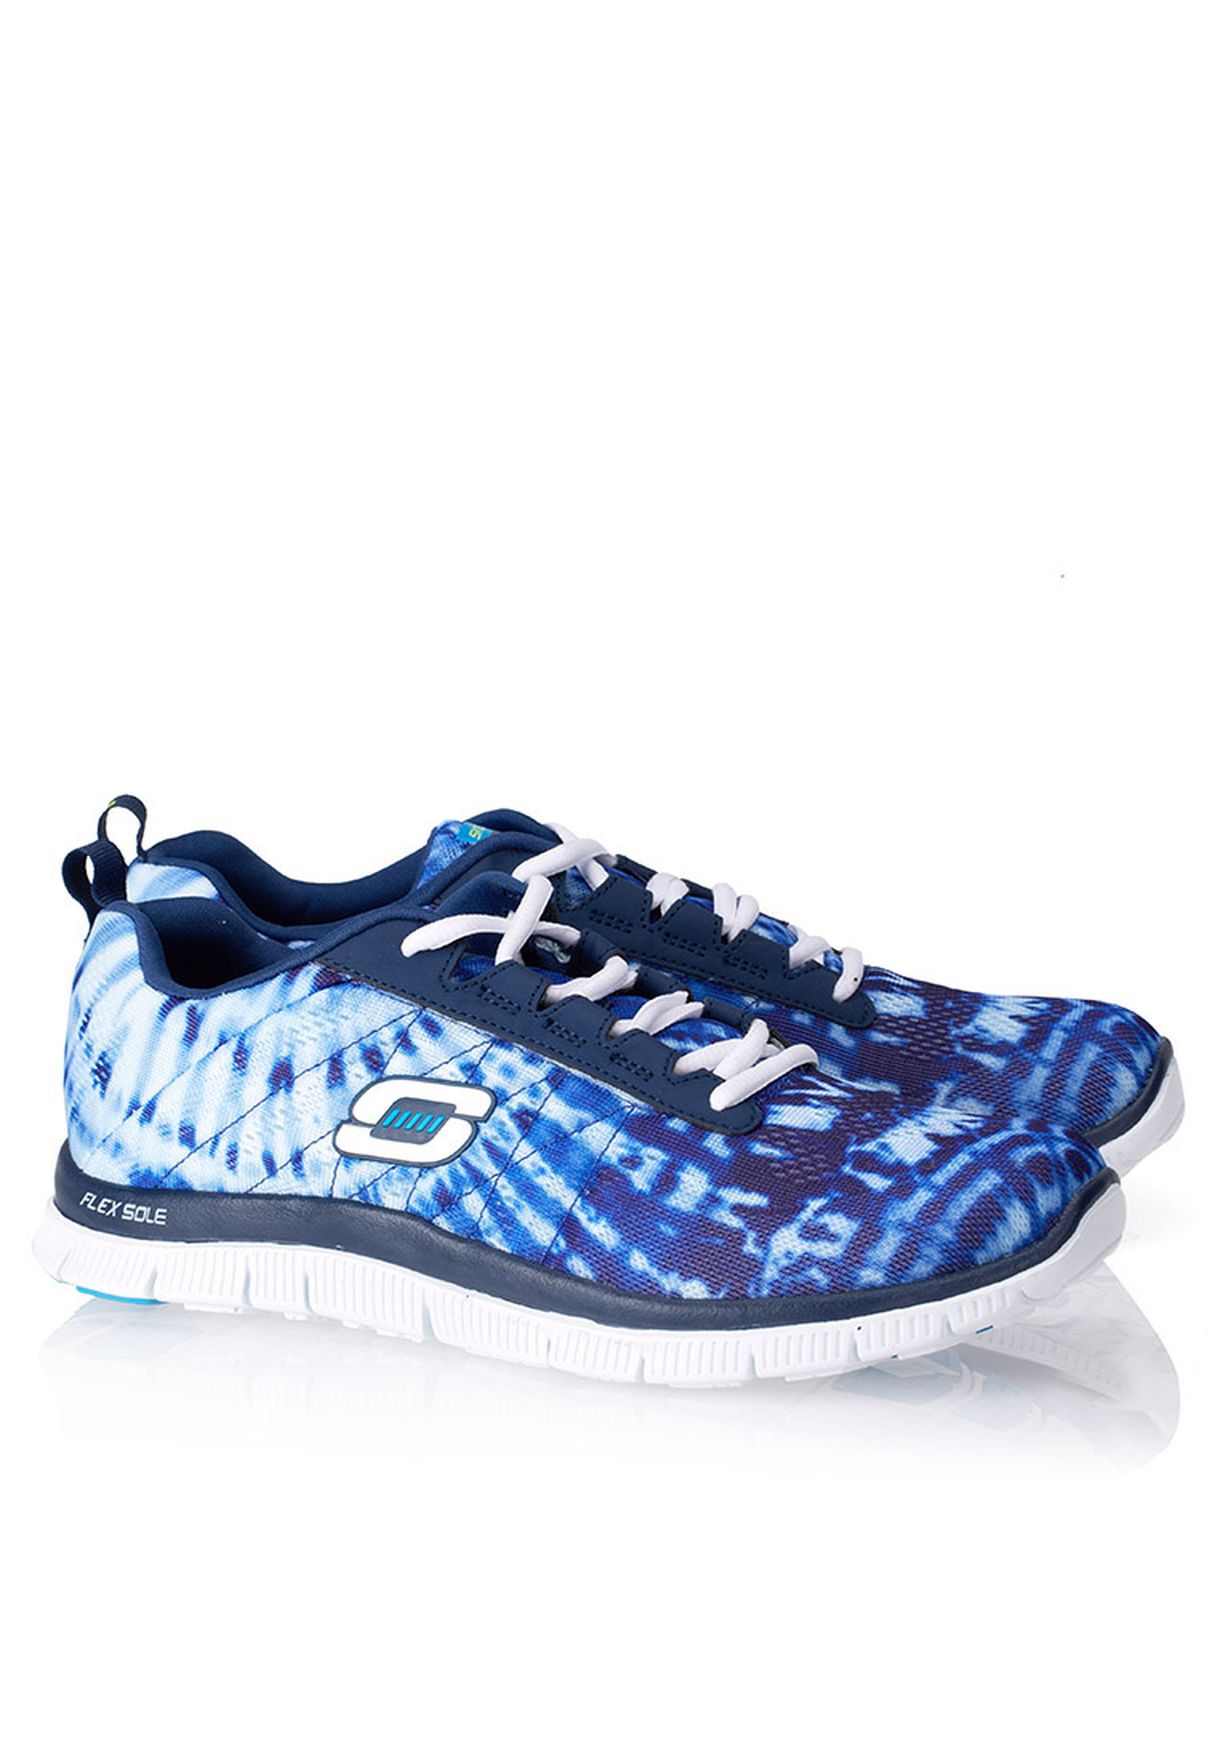 skechers flex appeal limited edition